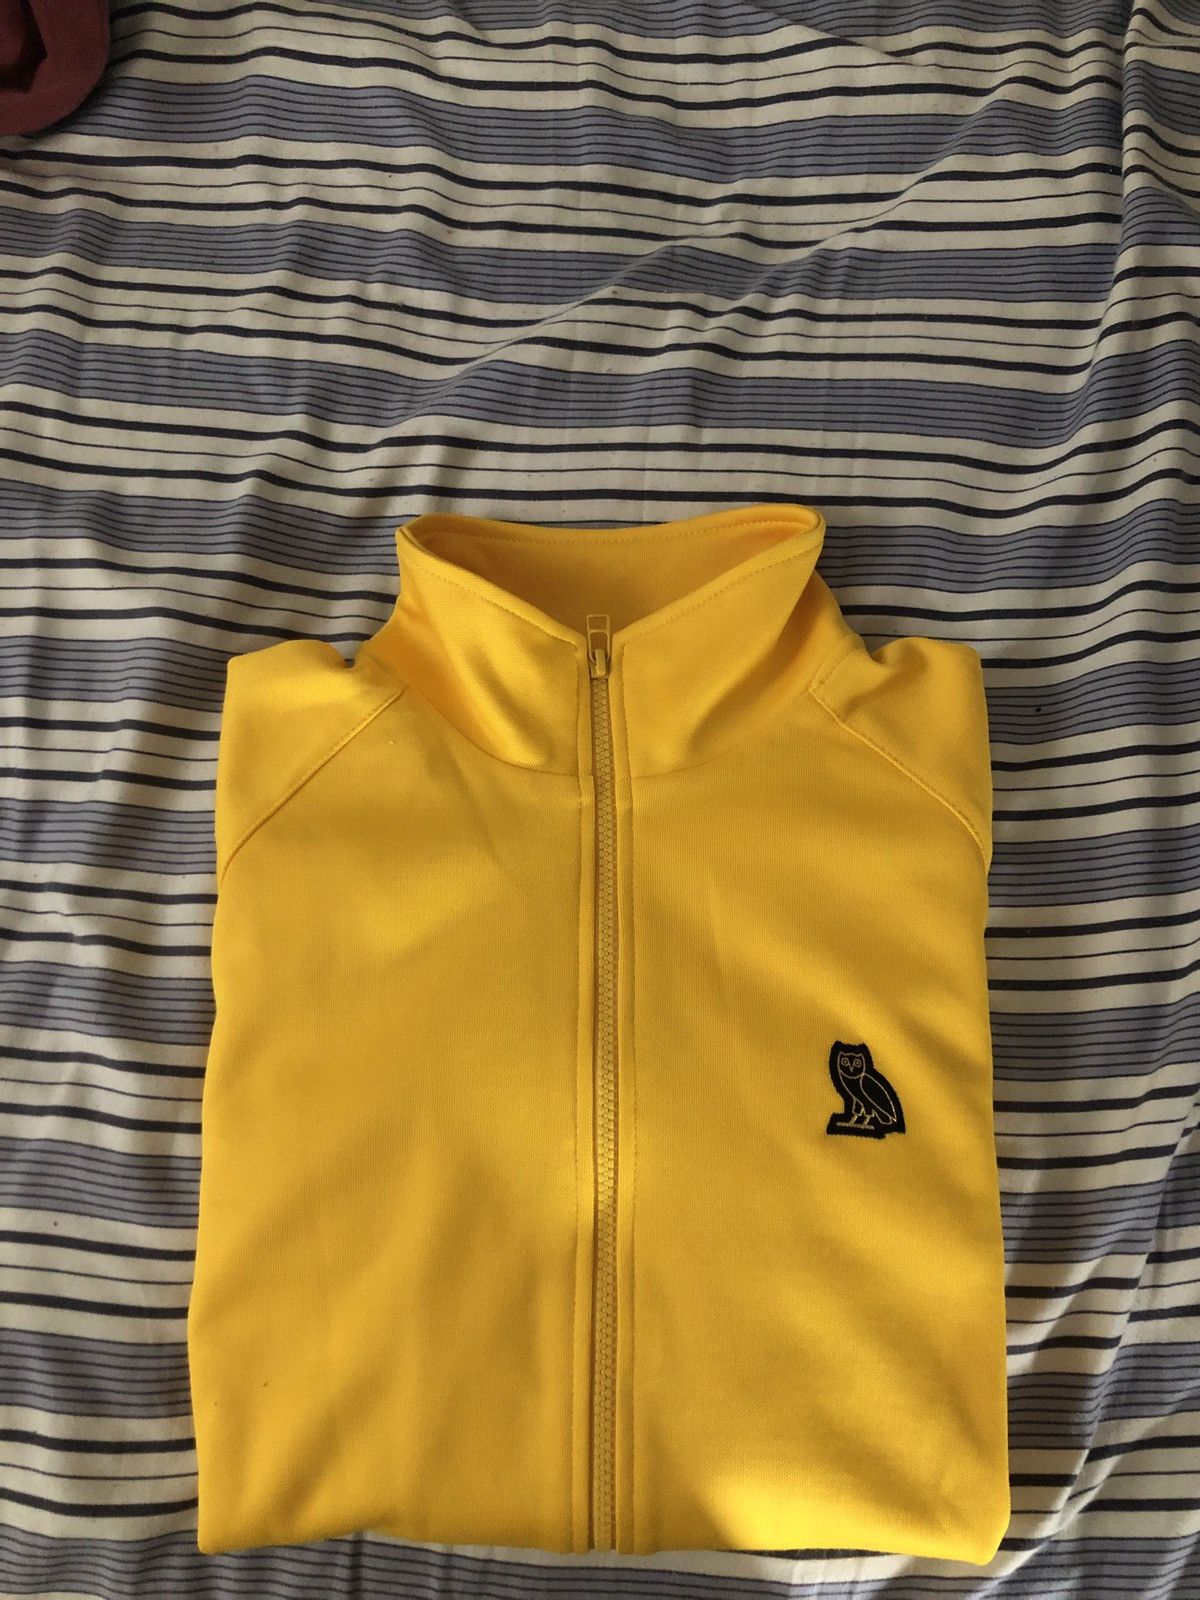 Octobers Very Own OVO zip up sweater Size US L / EU 52-54 / 3 - 1 Preview